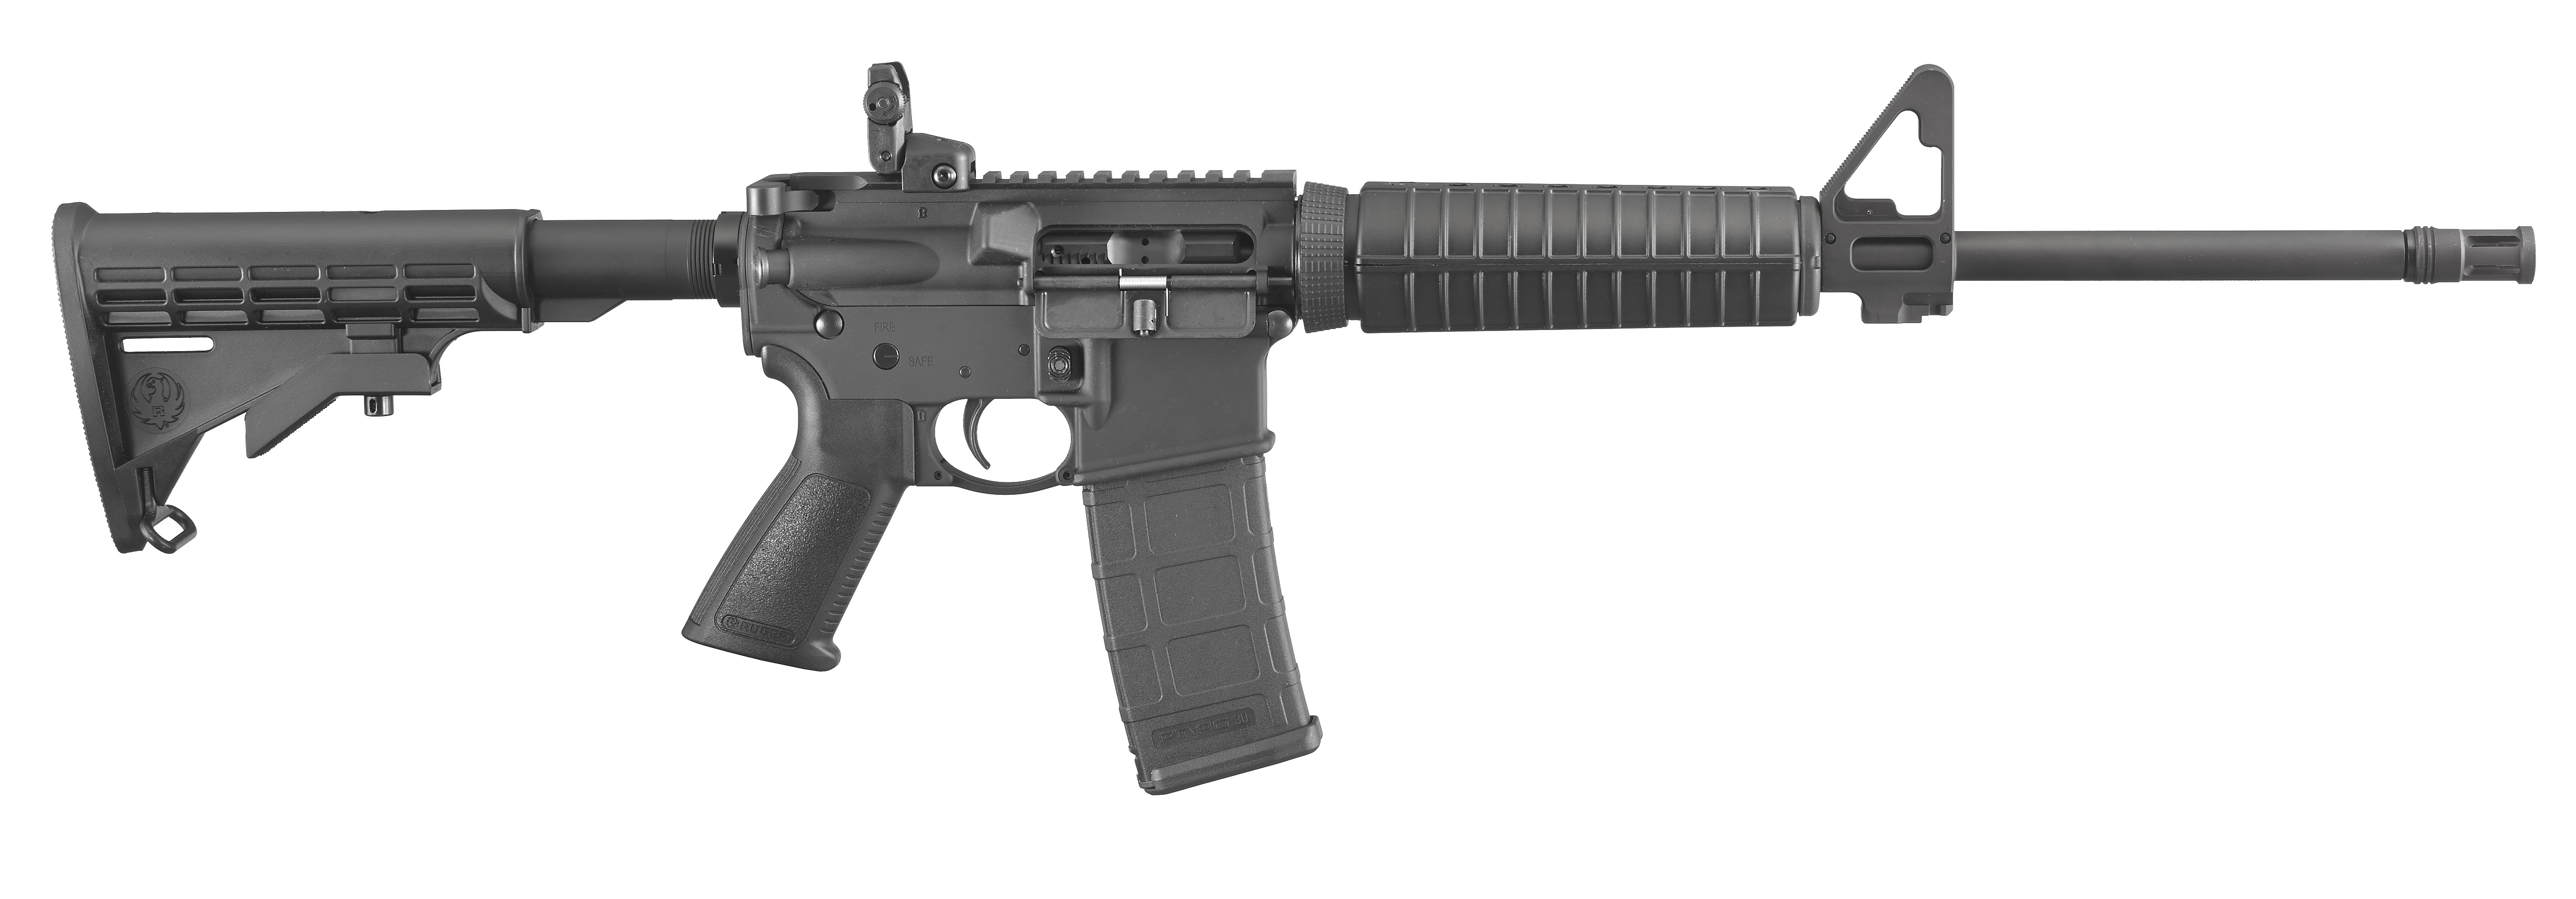 Ruger Announces The AR-556 | The Weapon Blog